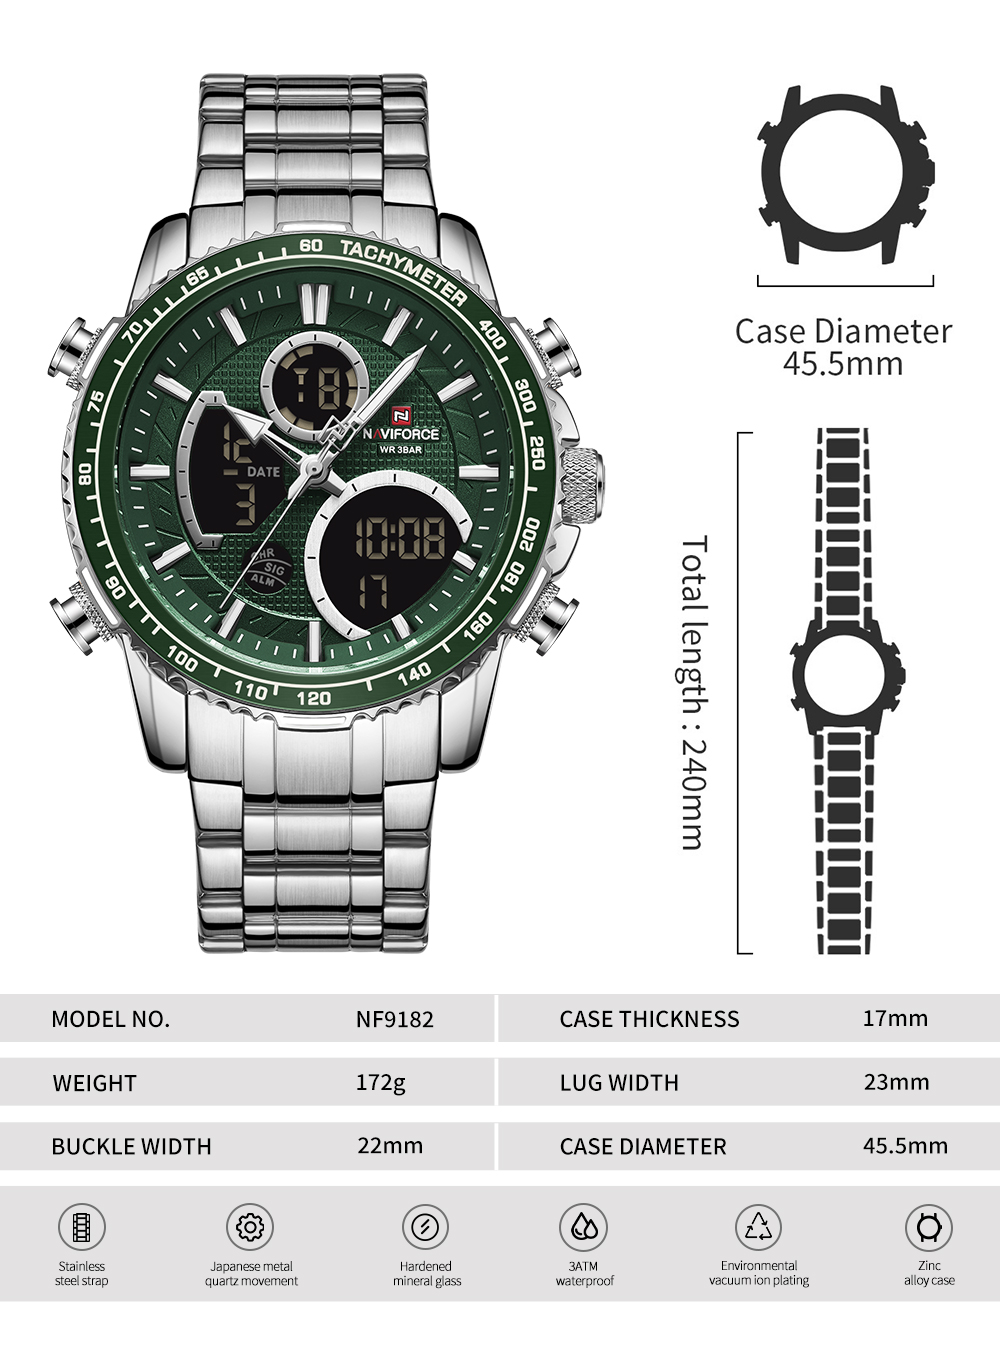 NF9182-watch Specifications